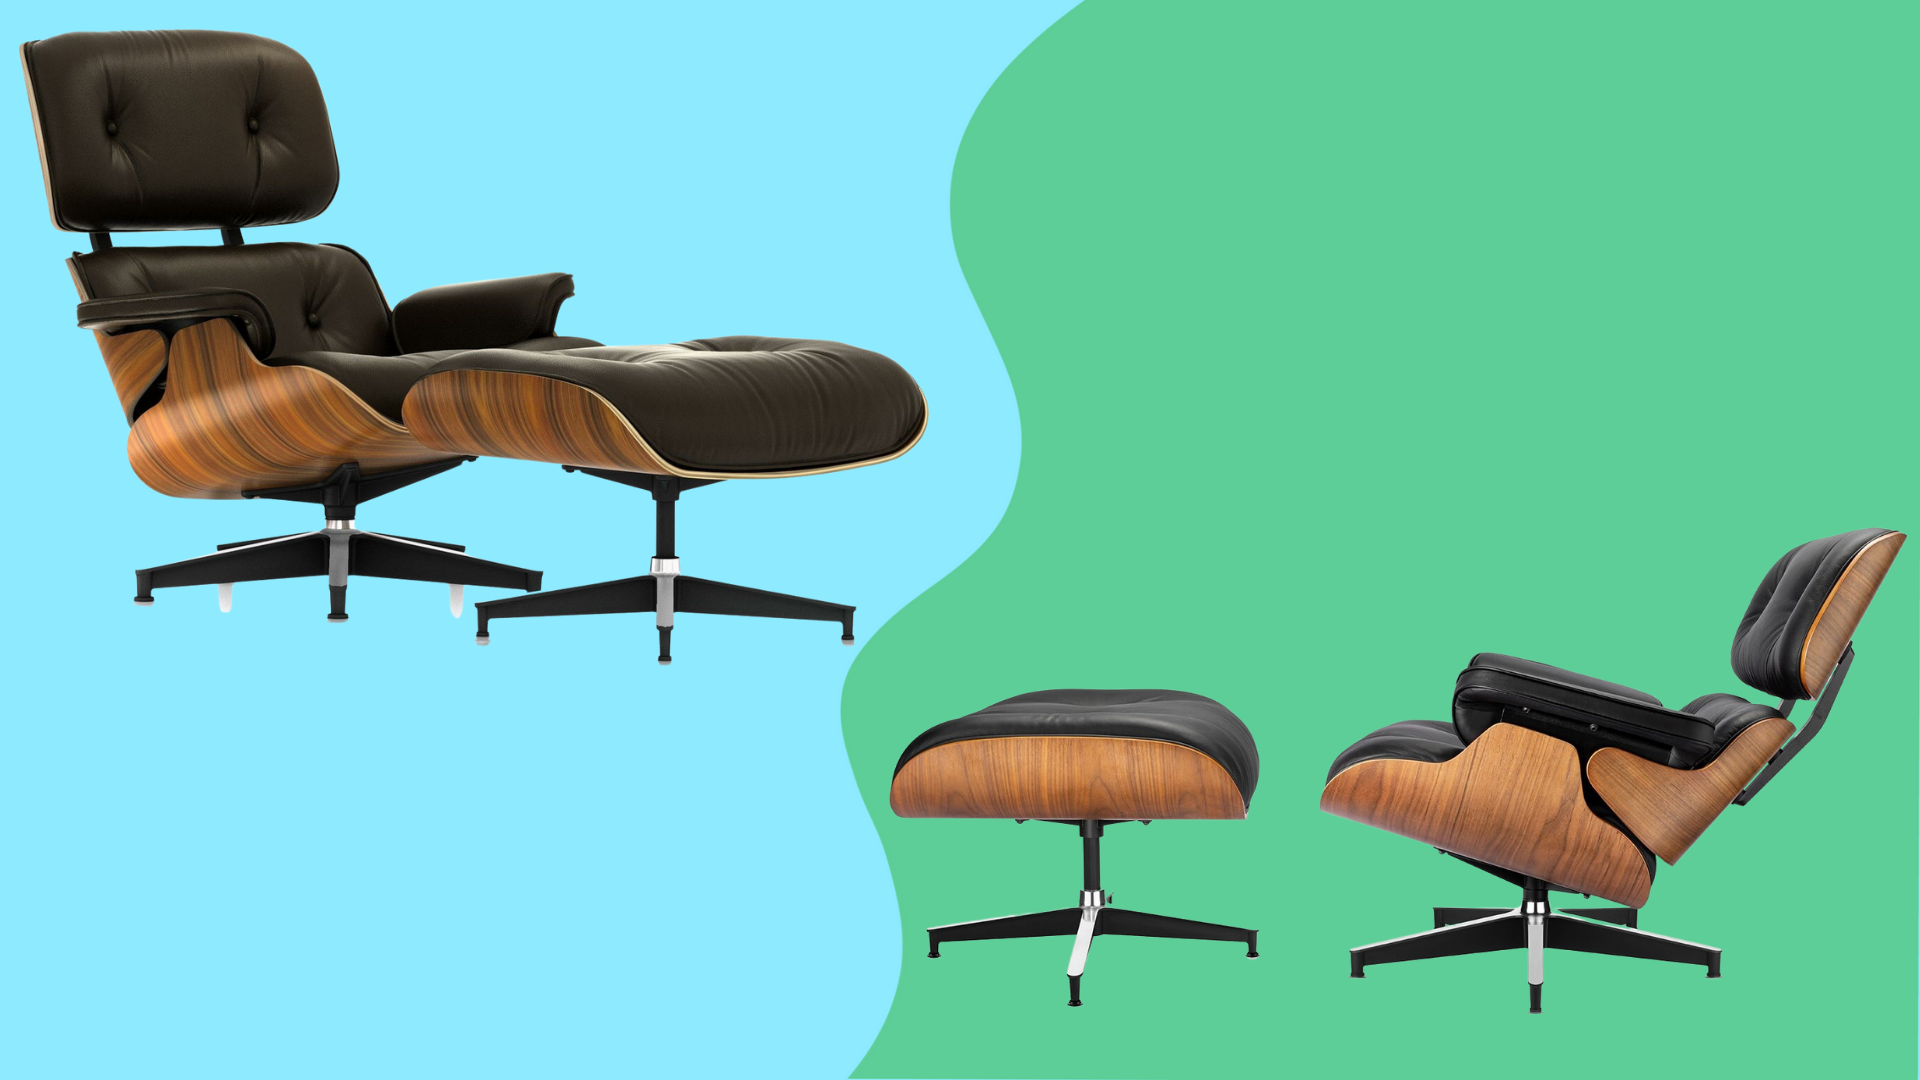 Suri nogmaals ik klaag How to find an affordable Eames chair replica